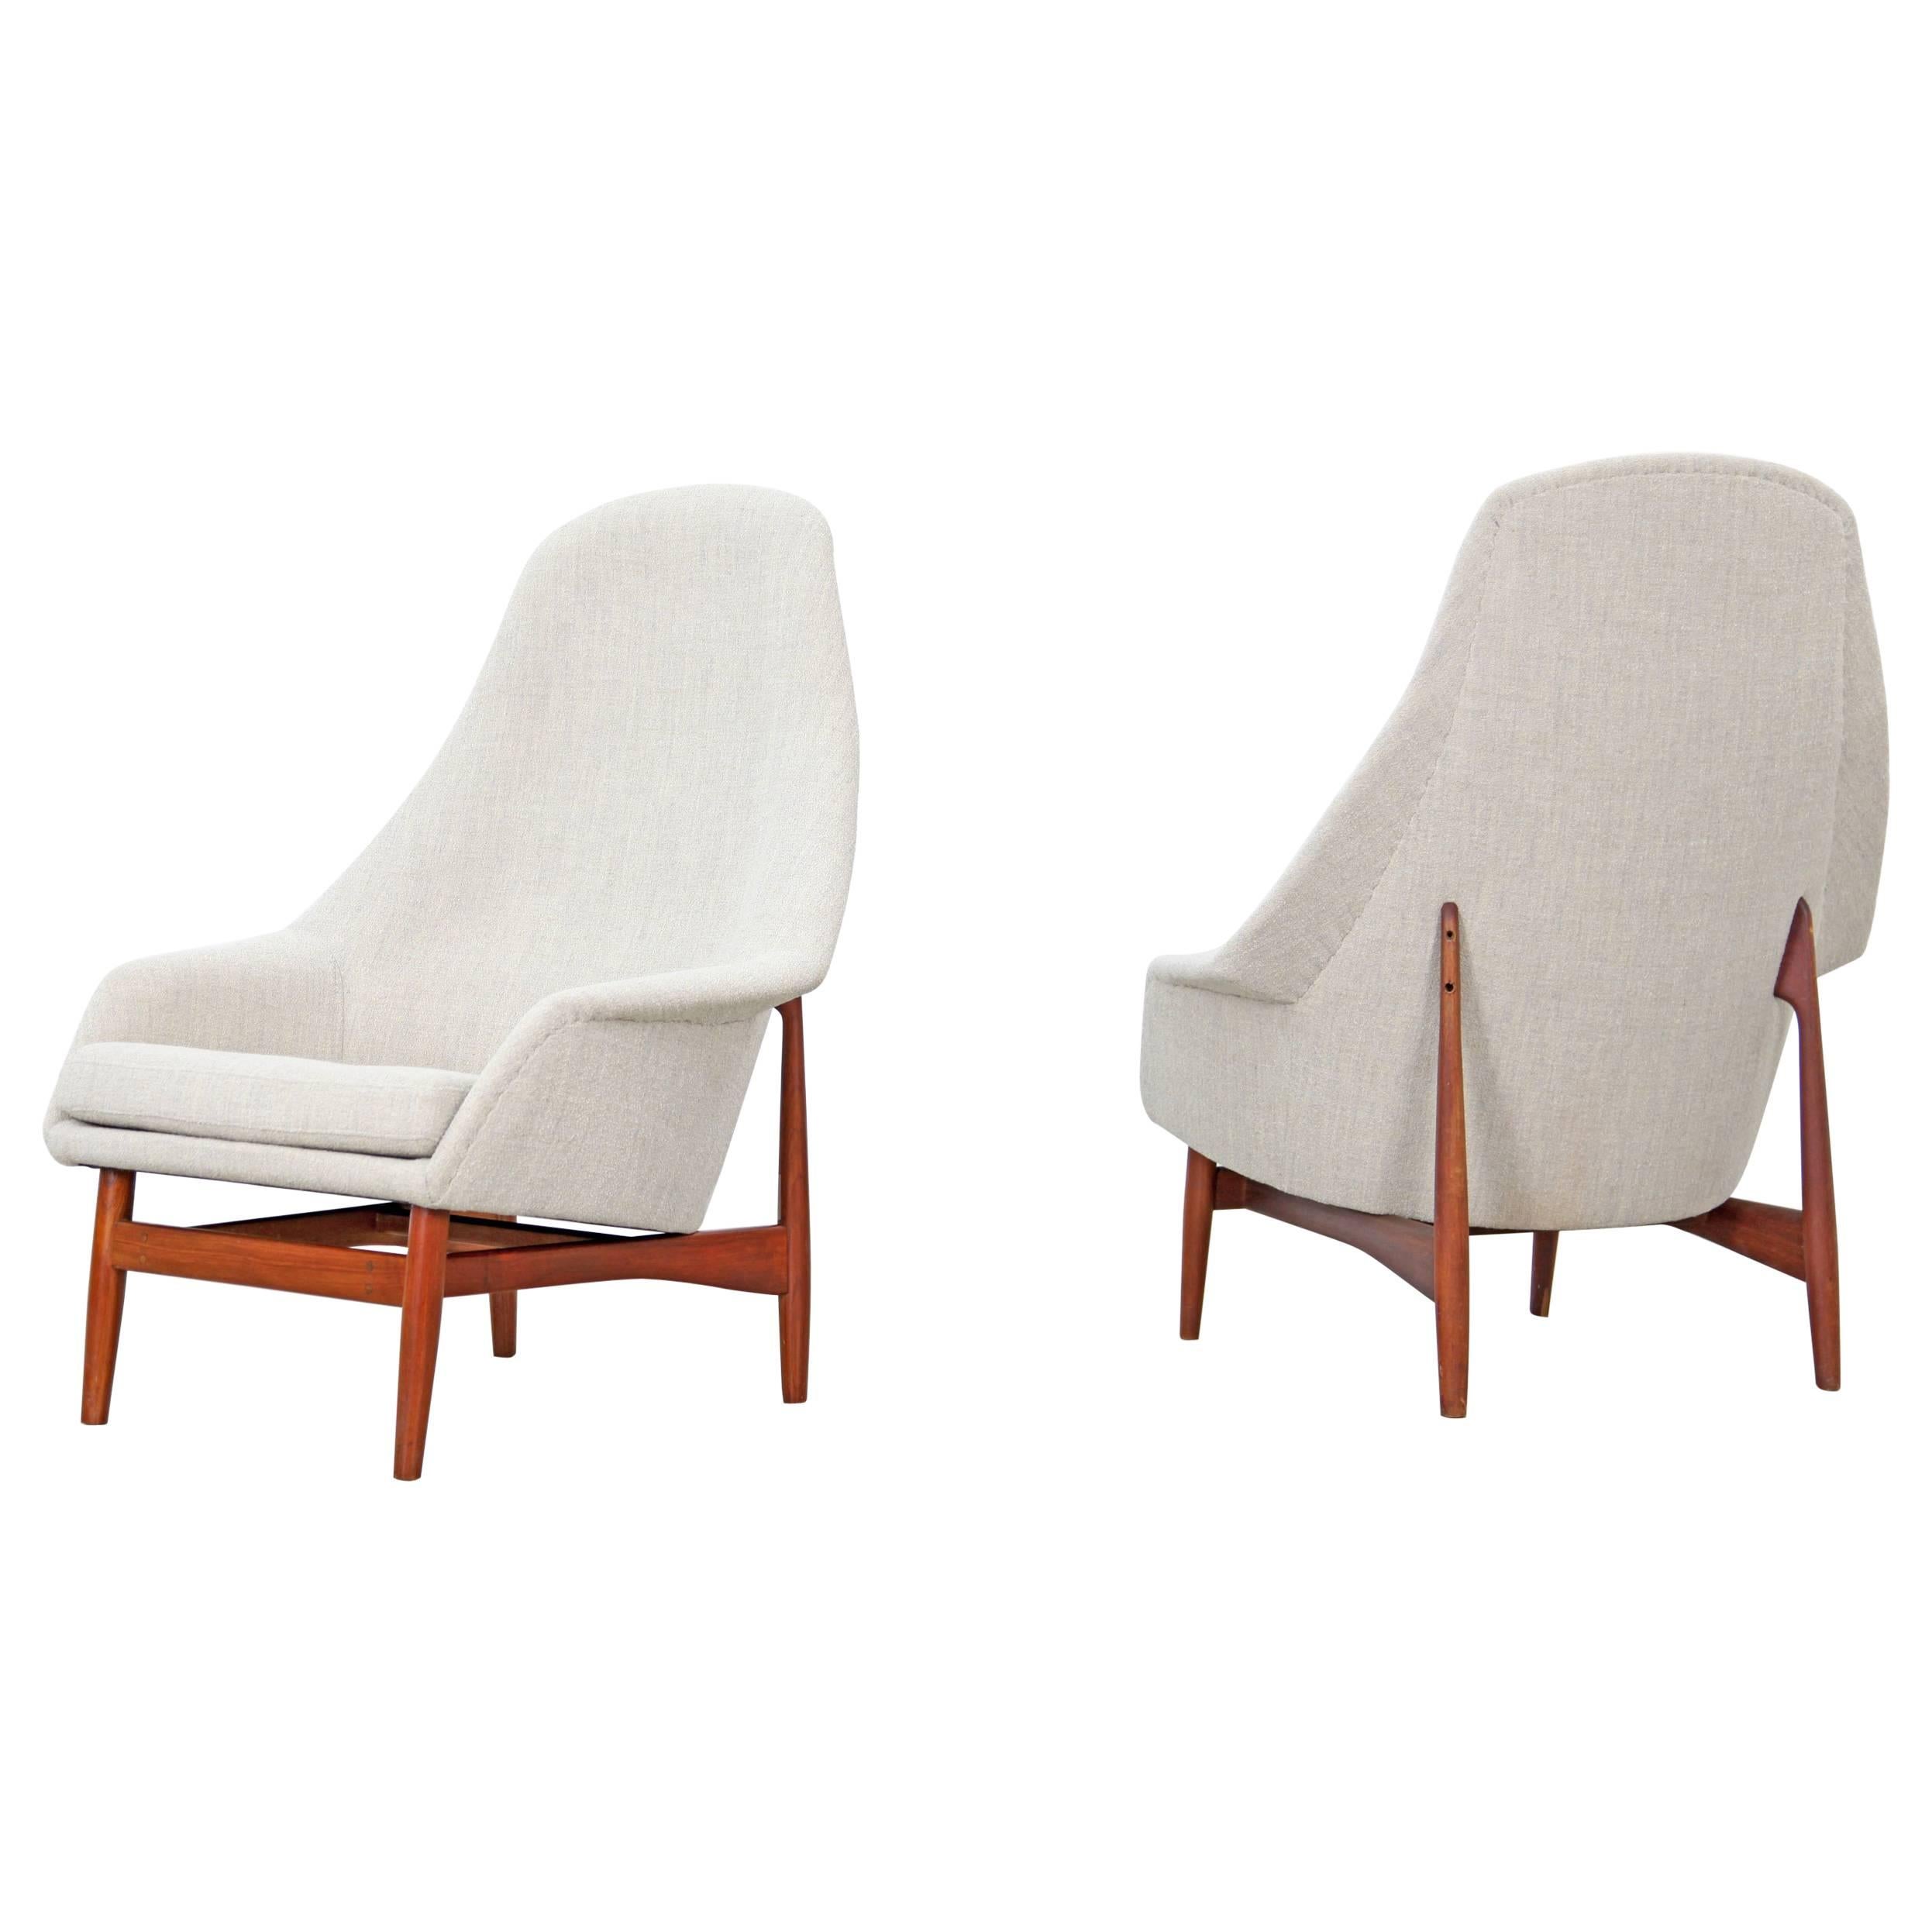 Set of Two High Back Lounge Chairs by Ib Kofod-Larsen, 1957 For Sale